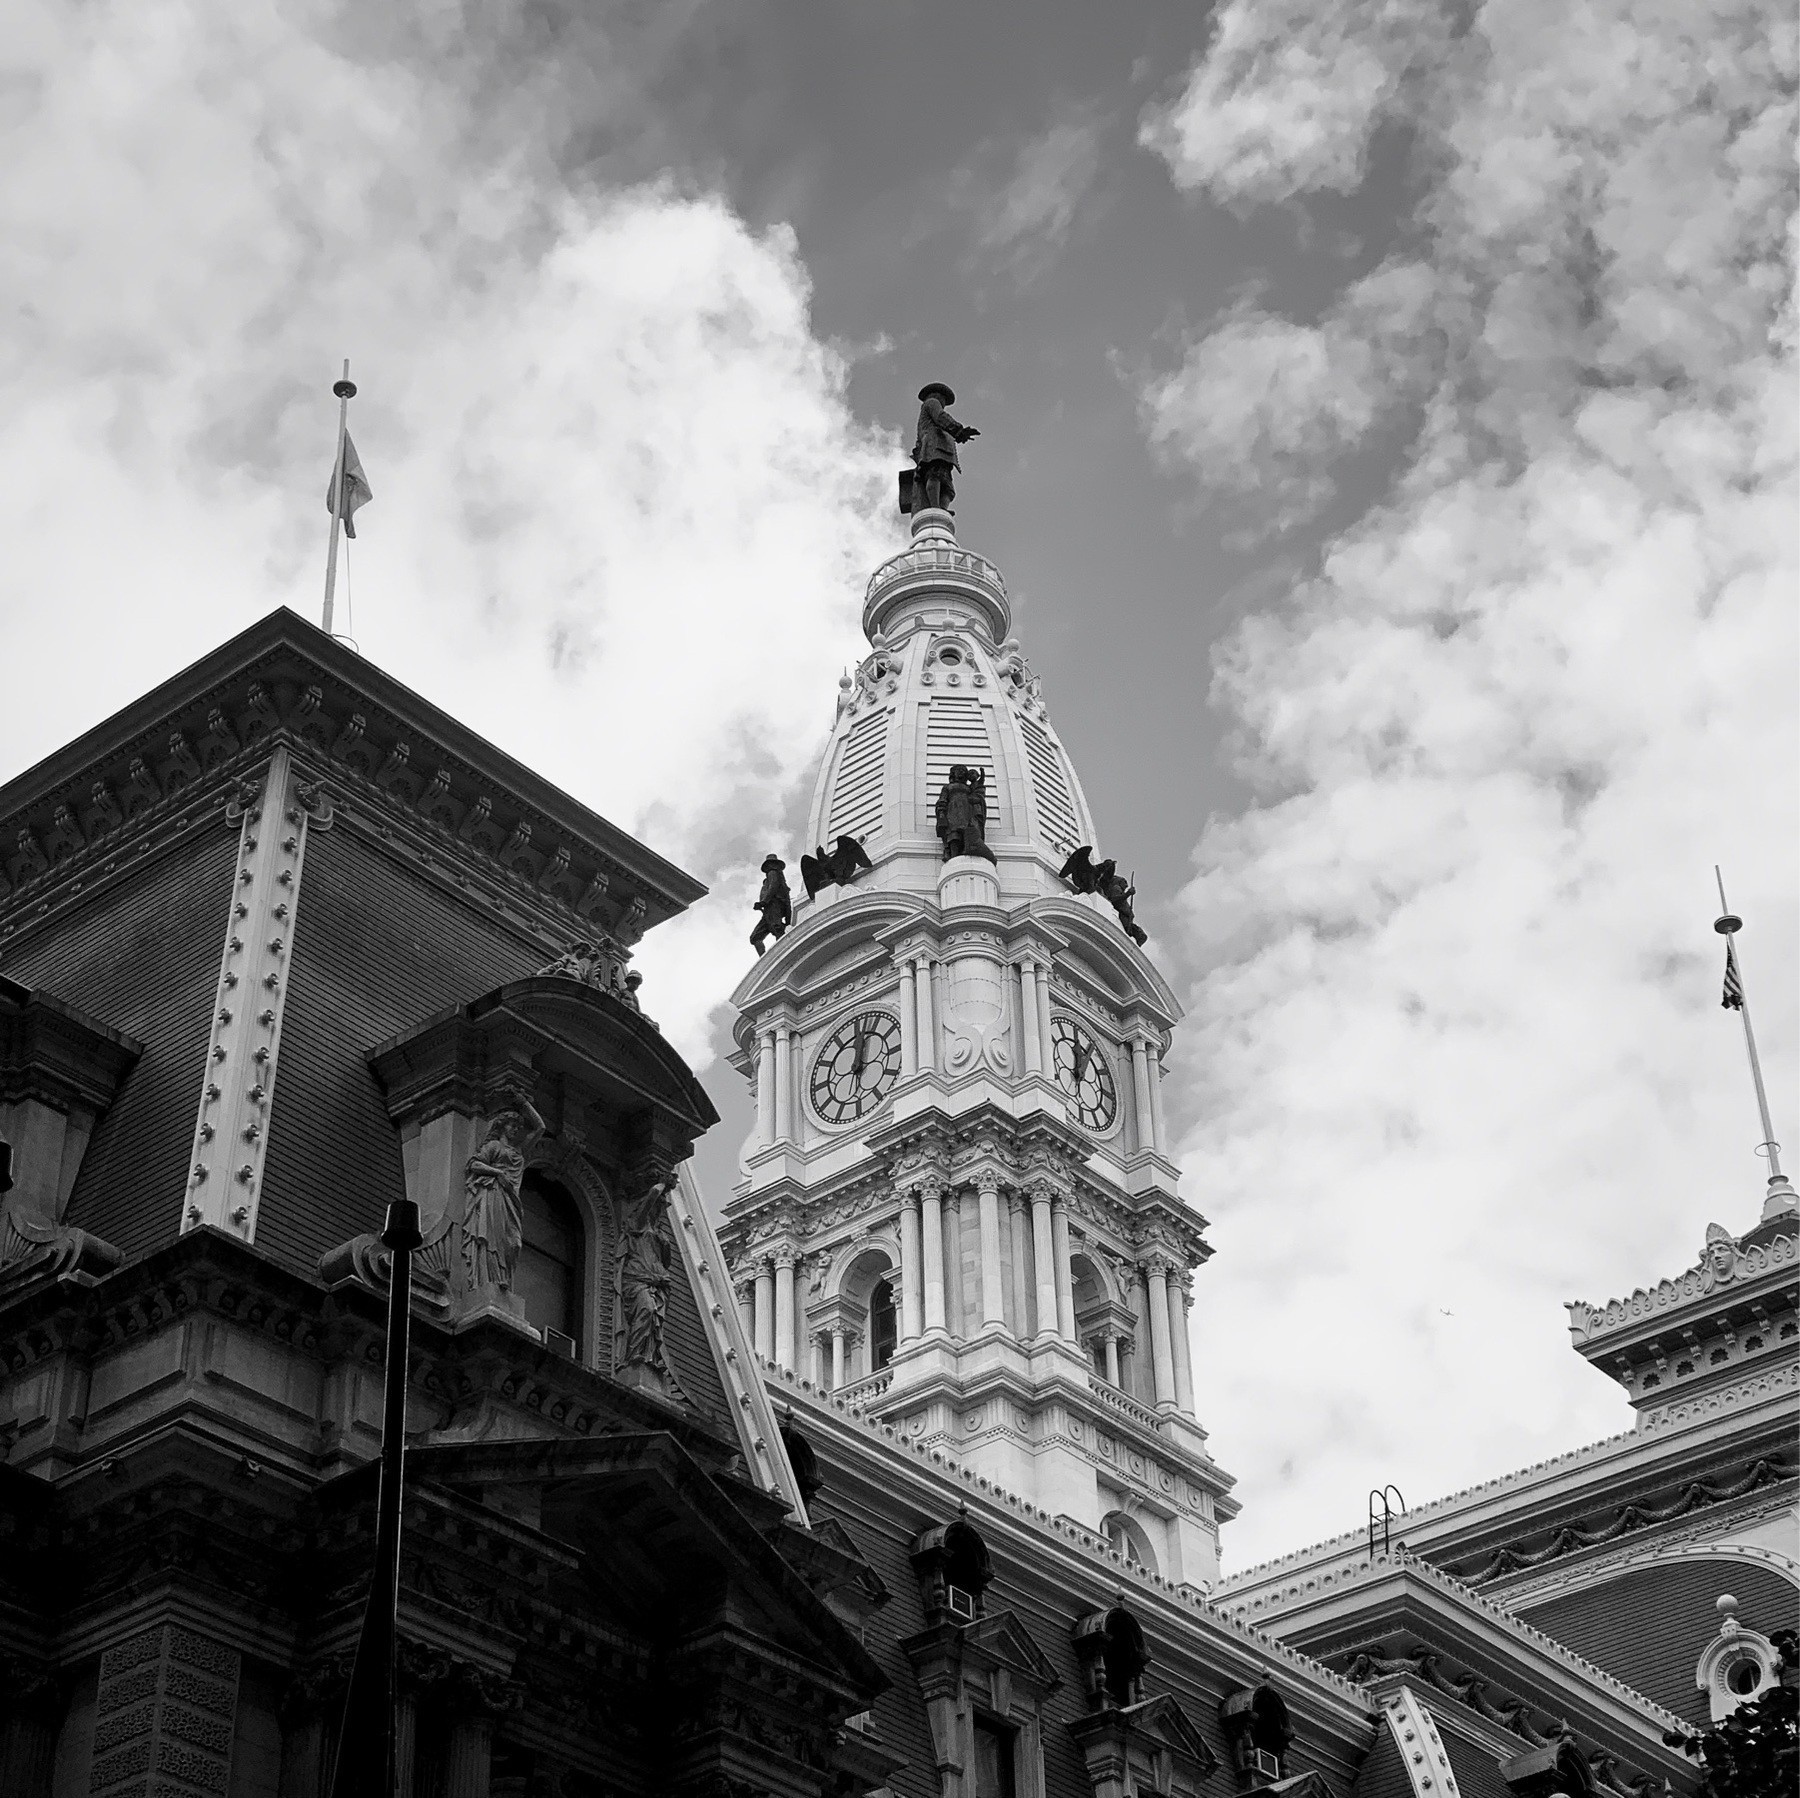 Middle tower of Philadelphia city hall, statue of William Penn on top.